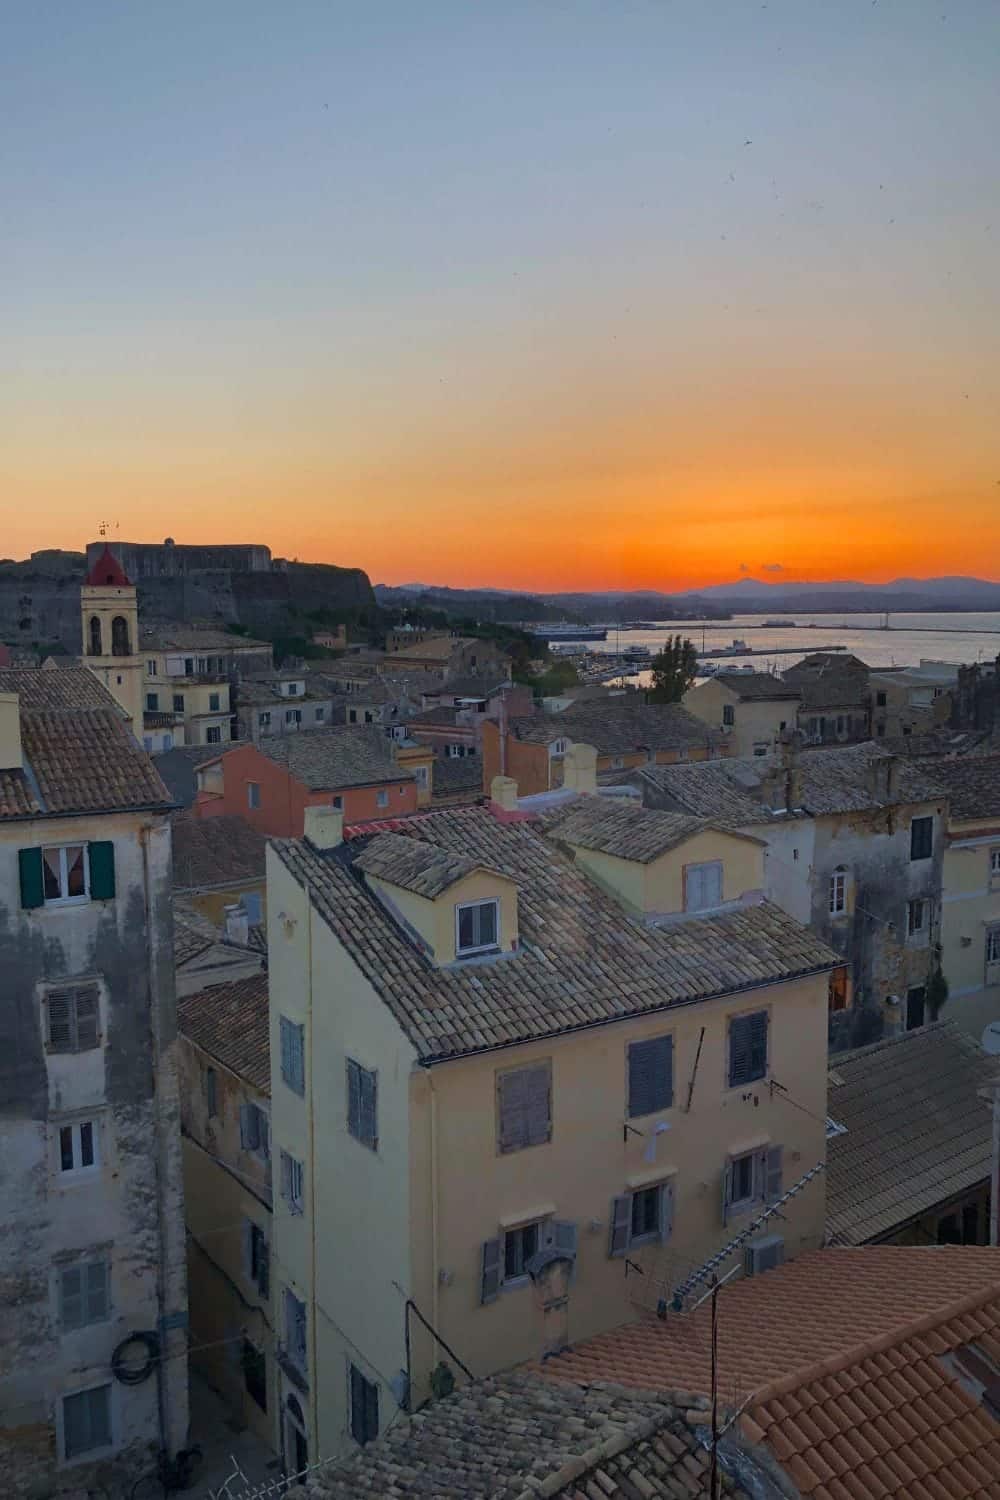 The bright orange sunset in Corfu, Geece with the colorful houses in the background.